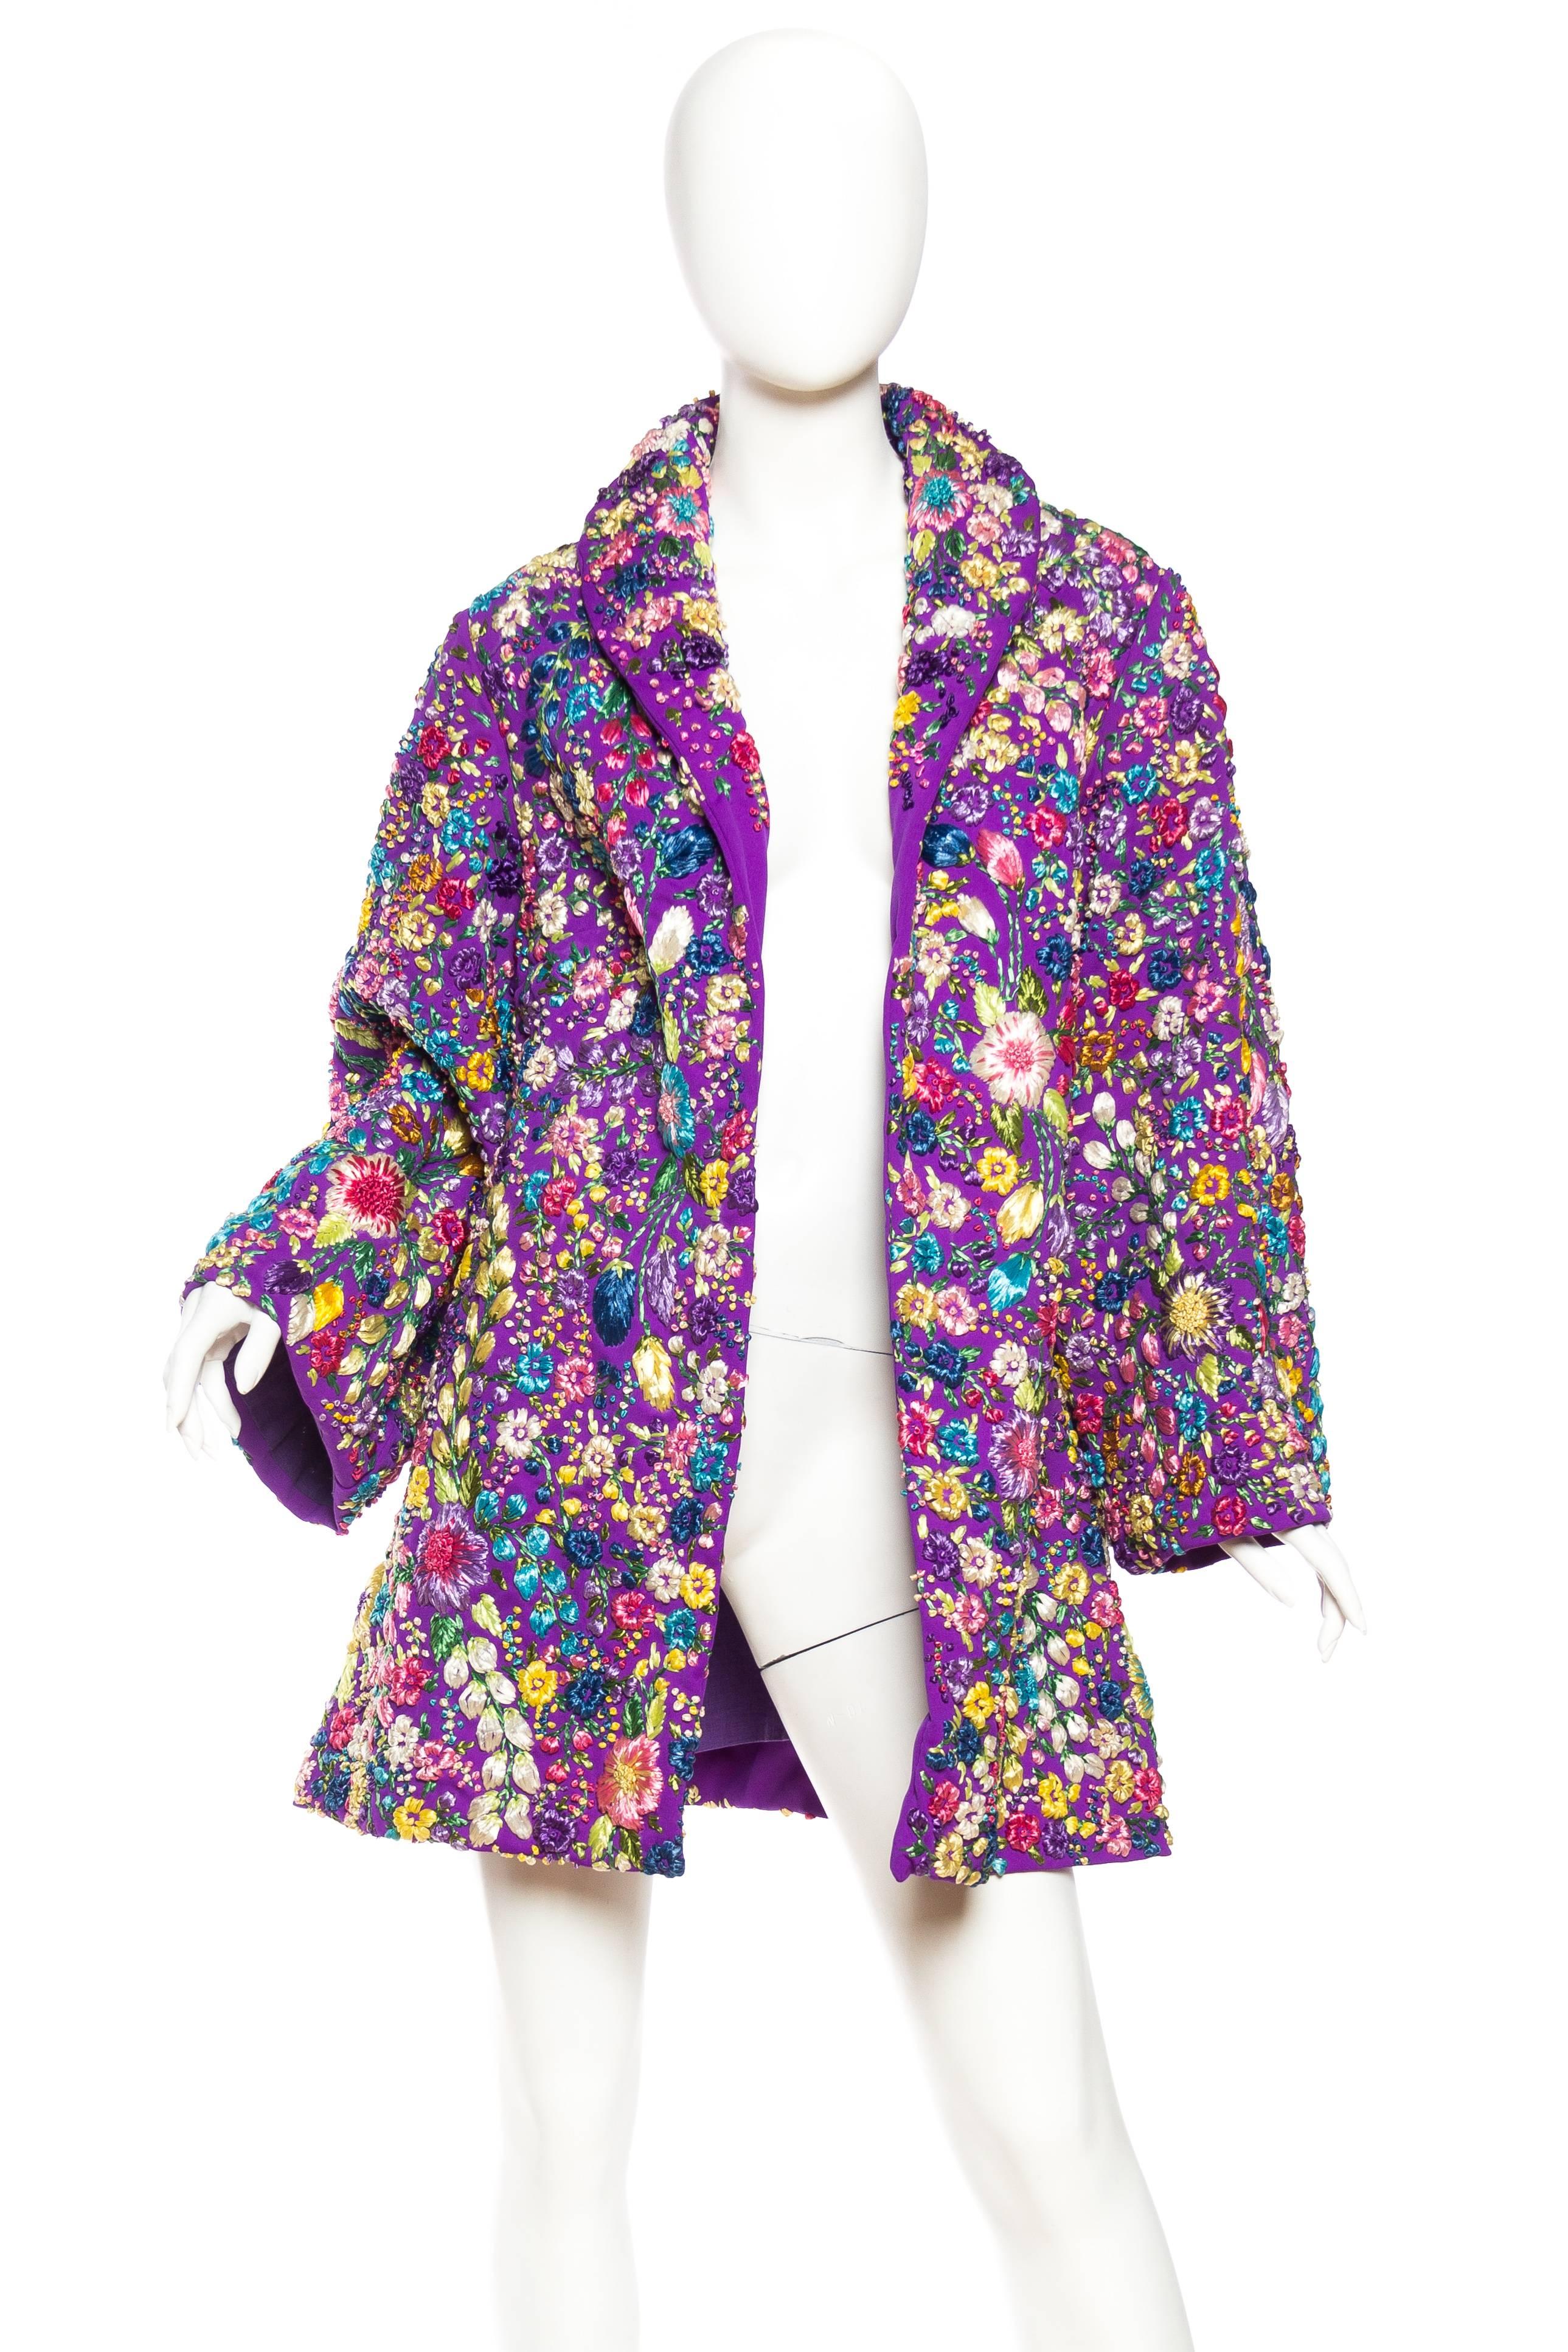 The wild abandon of the full on floral embroidery on this coat is stunning. 